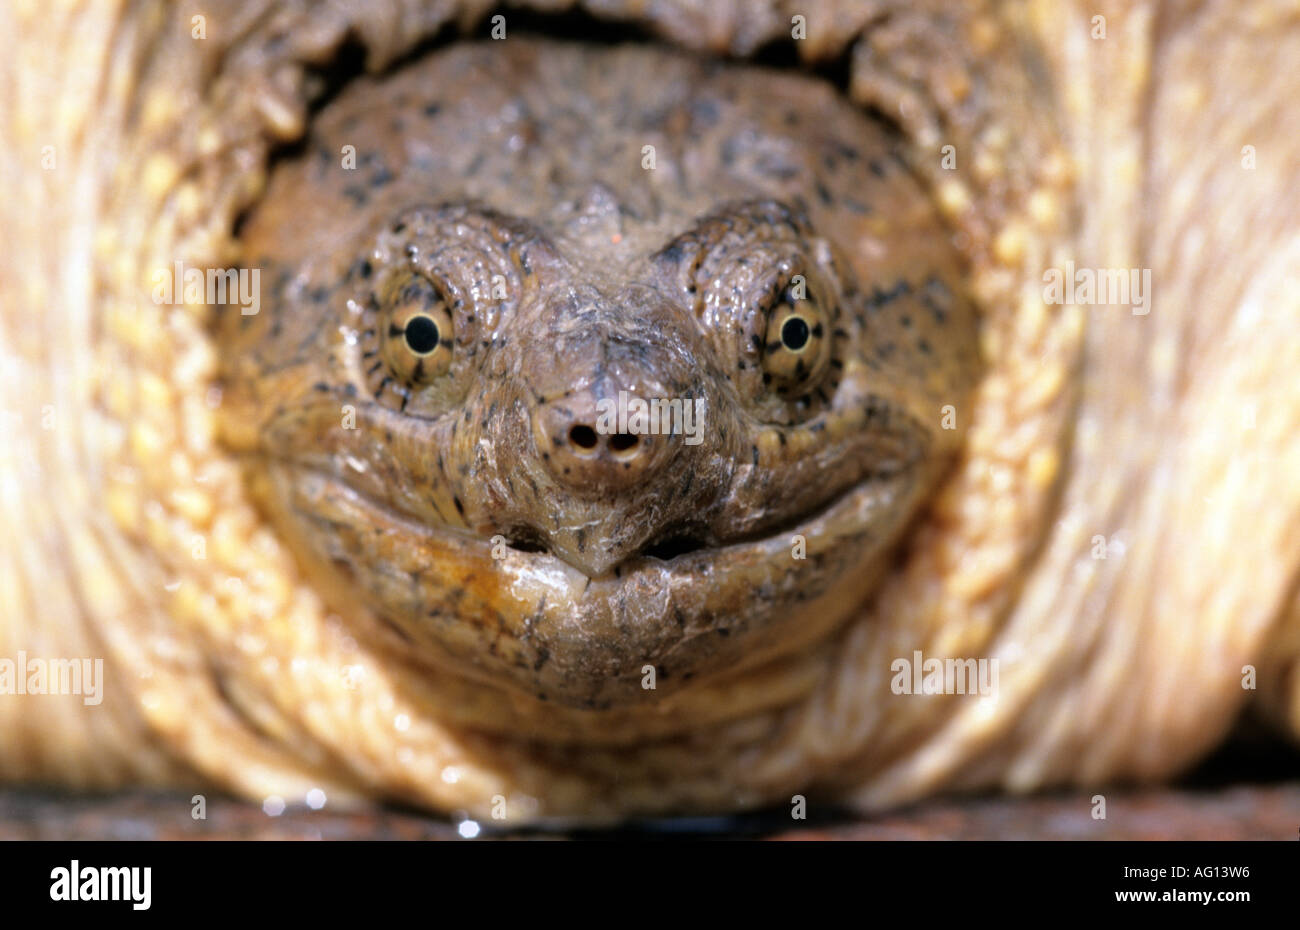 American snapping turtle Stock Photo